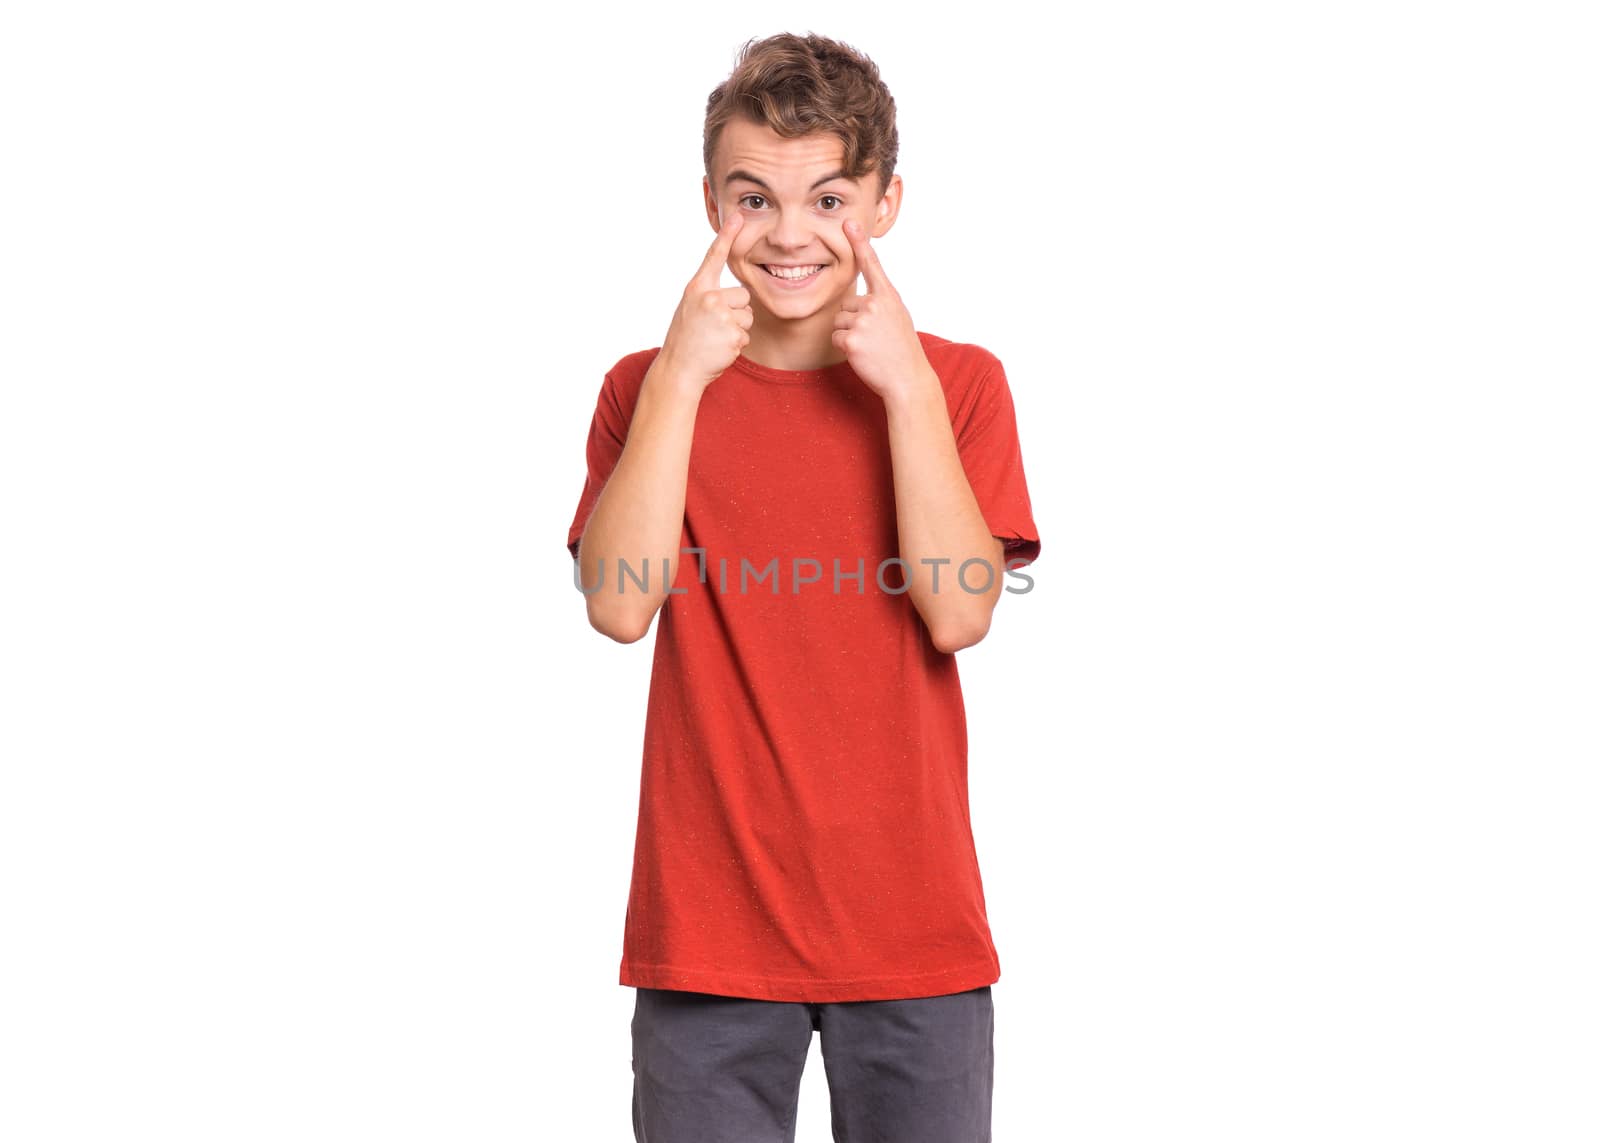 Handsome teen boy showing his eye, isolated on white background